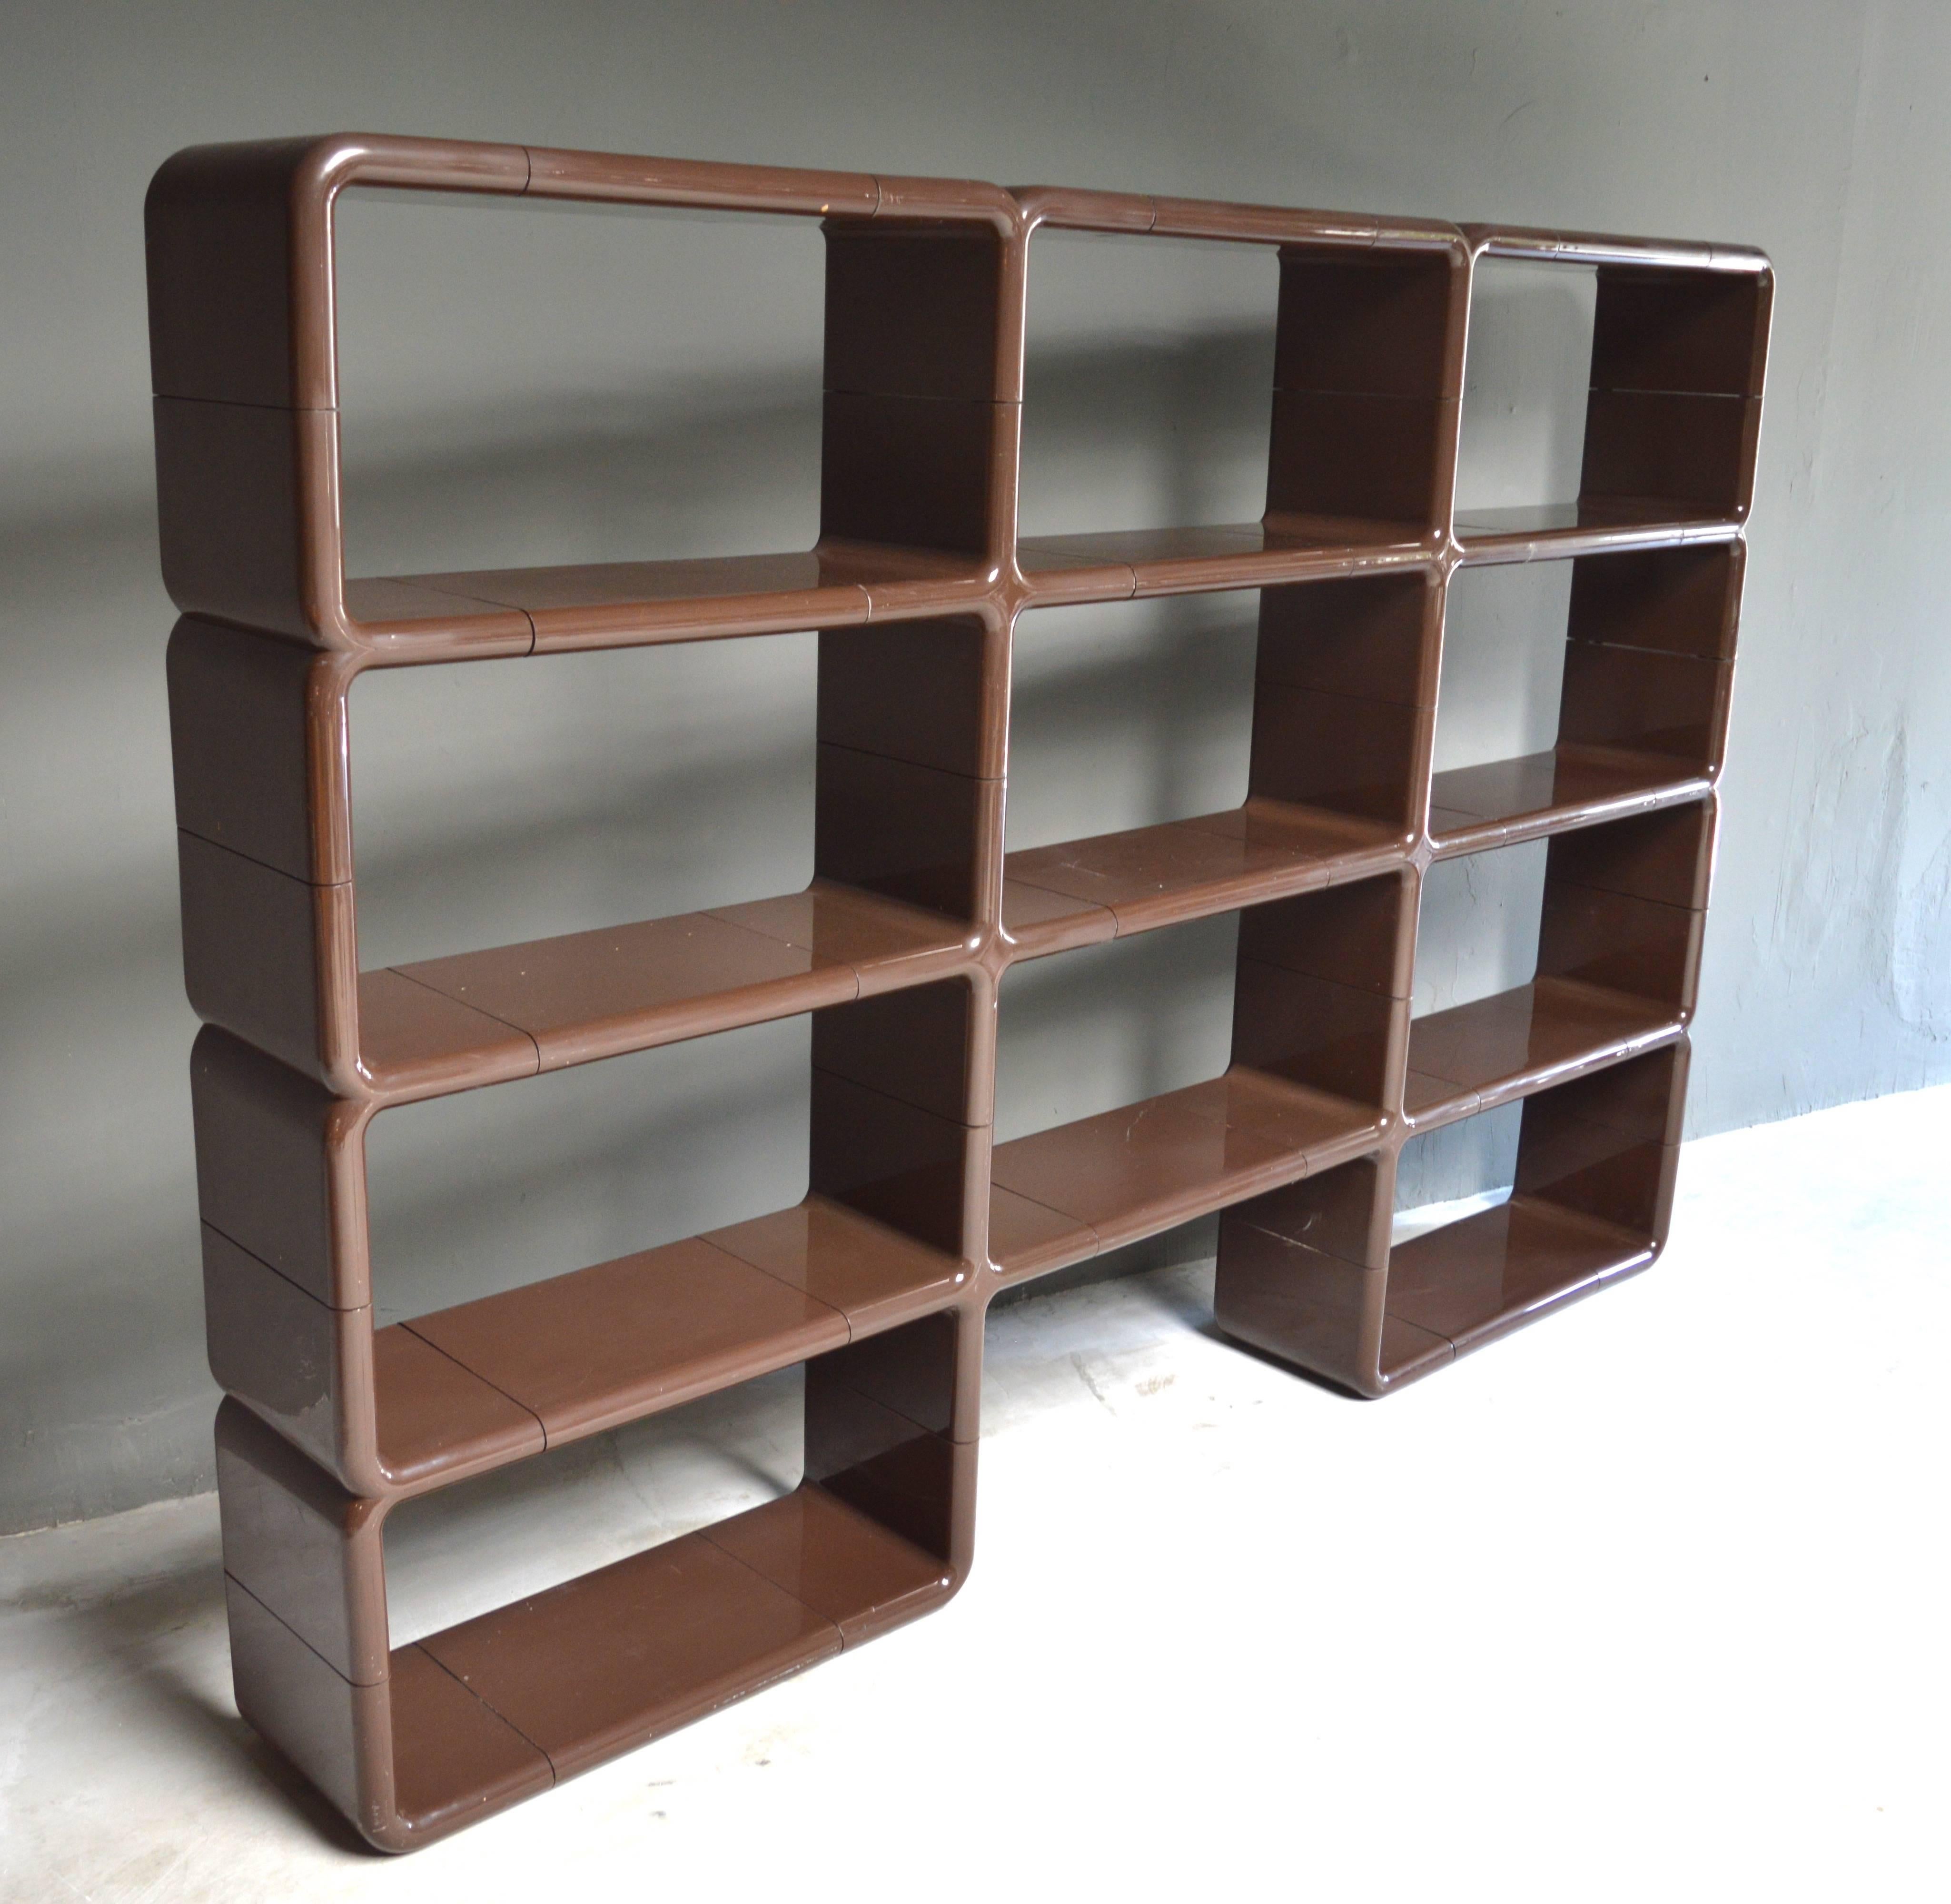 Four-tiered plastic bookcase/shelving unit by Kay Leroy Ruggles. Modular unit includes 34 individual pieces which can be arranged in a multitude of ways. Deep chocolate brown color. Scratches throughout. Some internal pegs missing. Very presentable